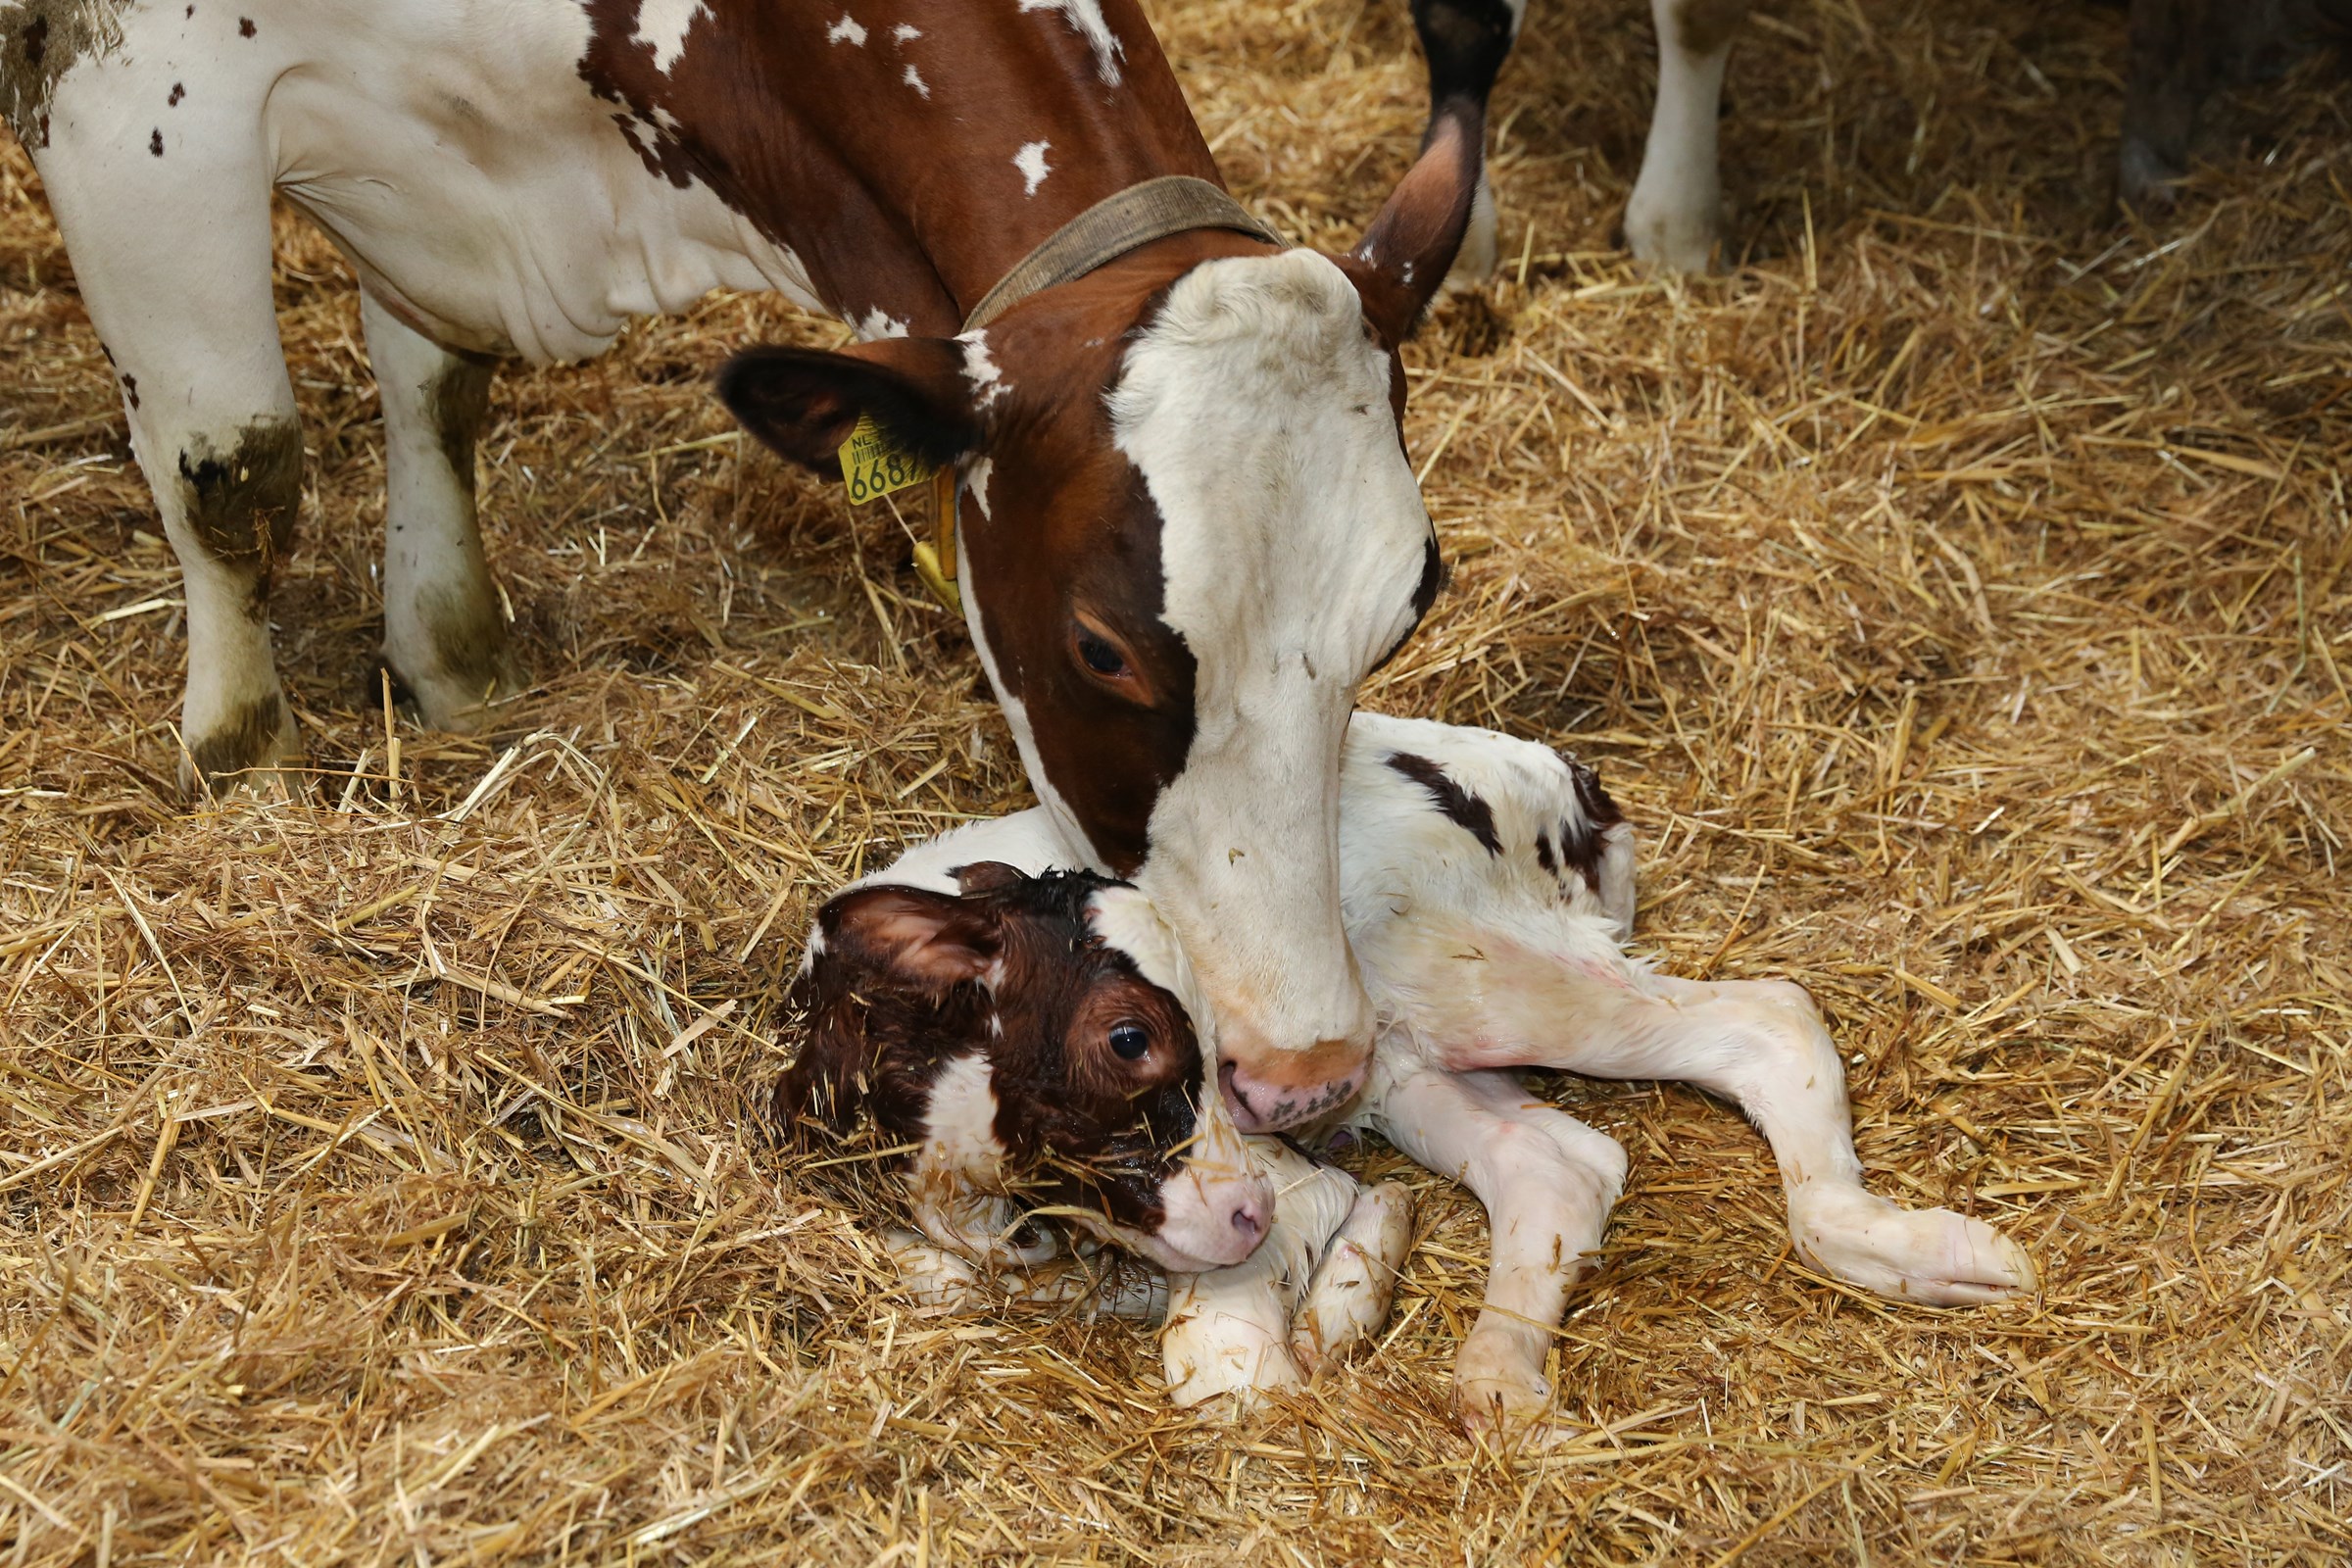 Feeding Reviva after calving will boost your cows’ vitality